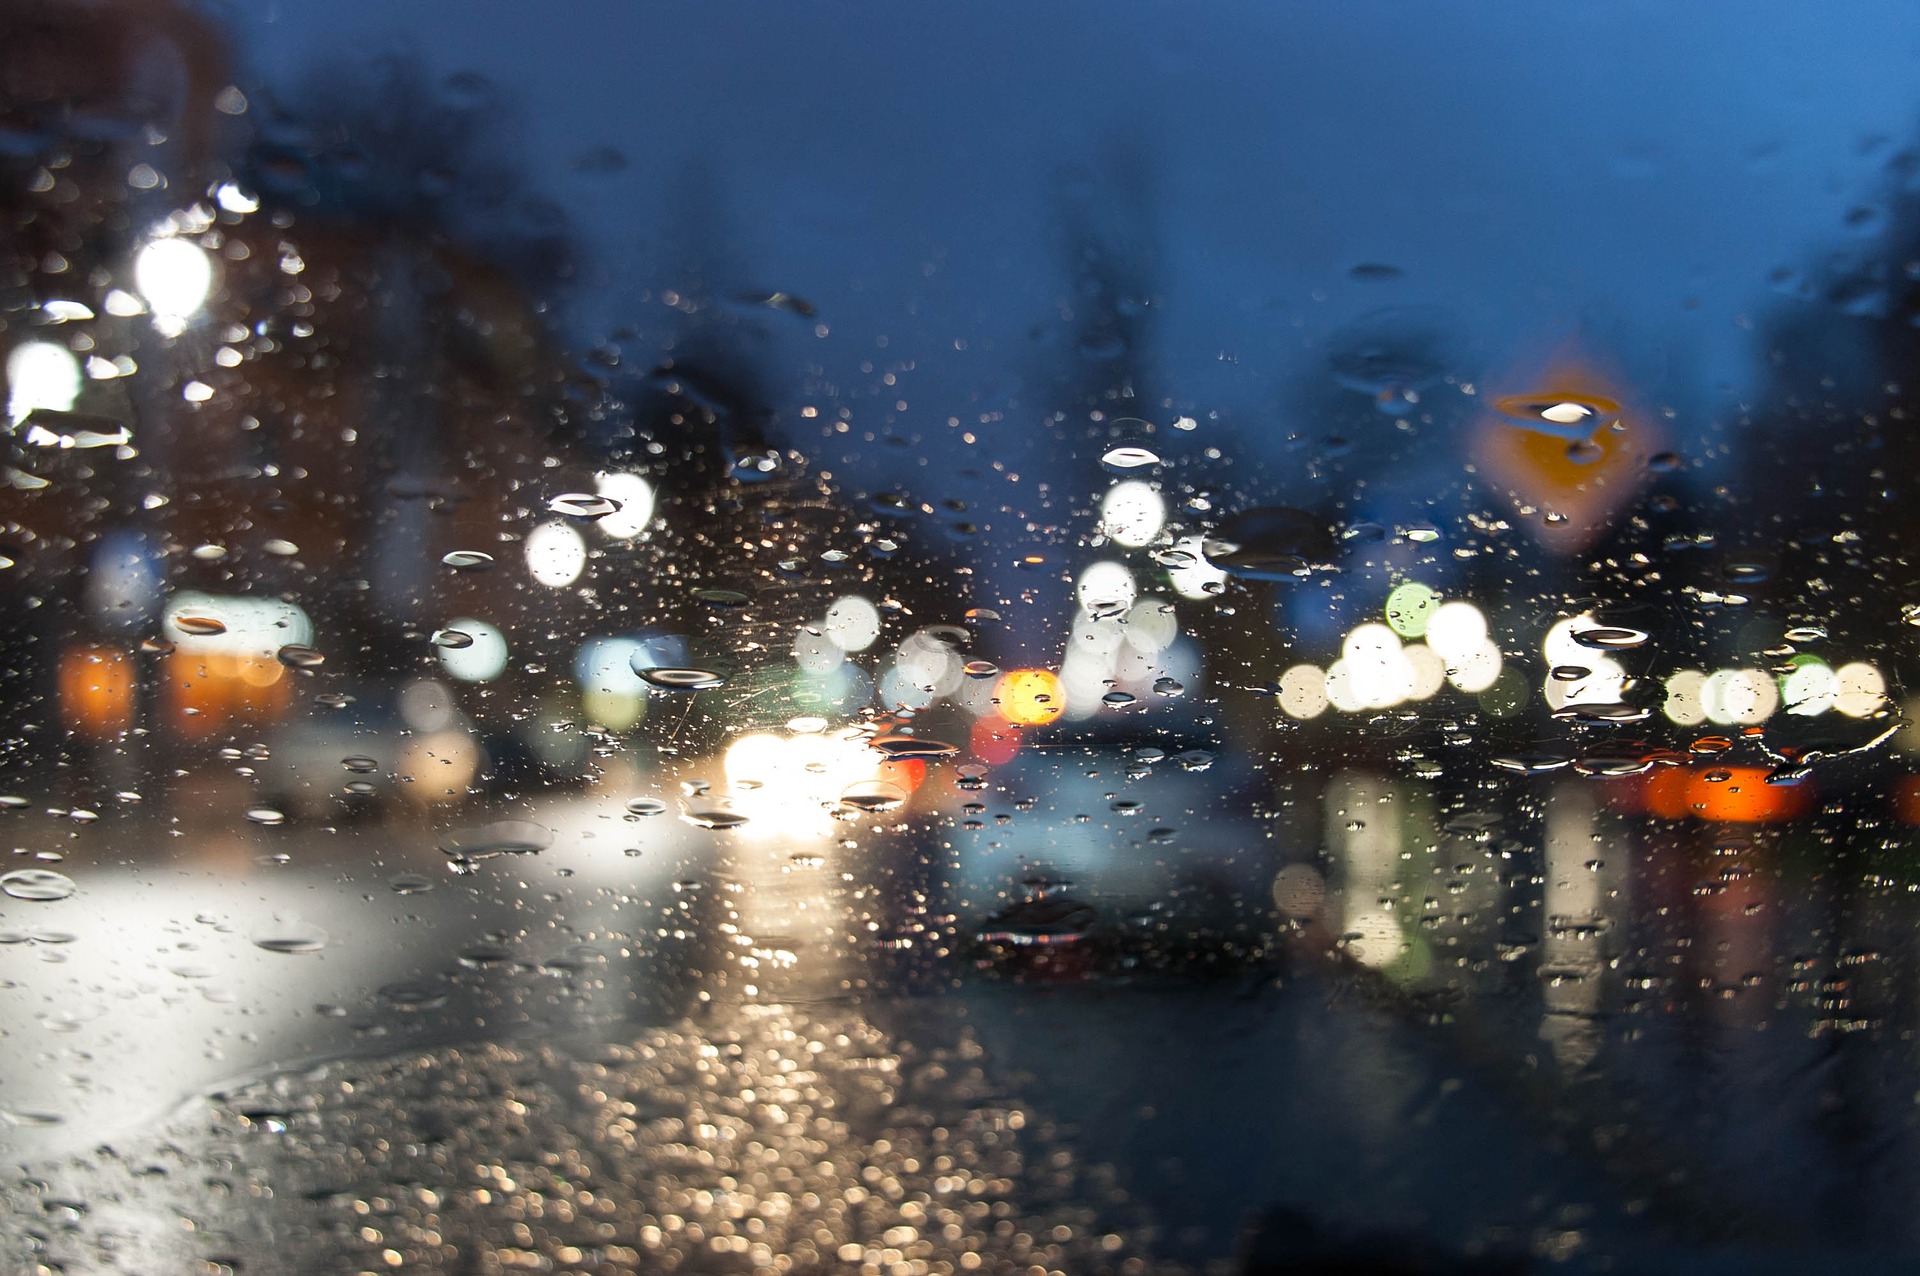 A nighttime scene viewed from inside a car, with raindrops scattered across the windshield. The raindrops create a blurred effect, distorting the colorful lights of the city outside.